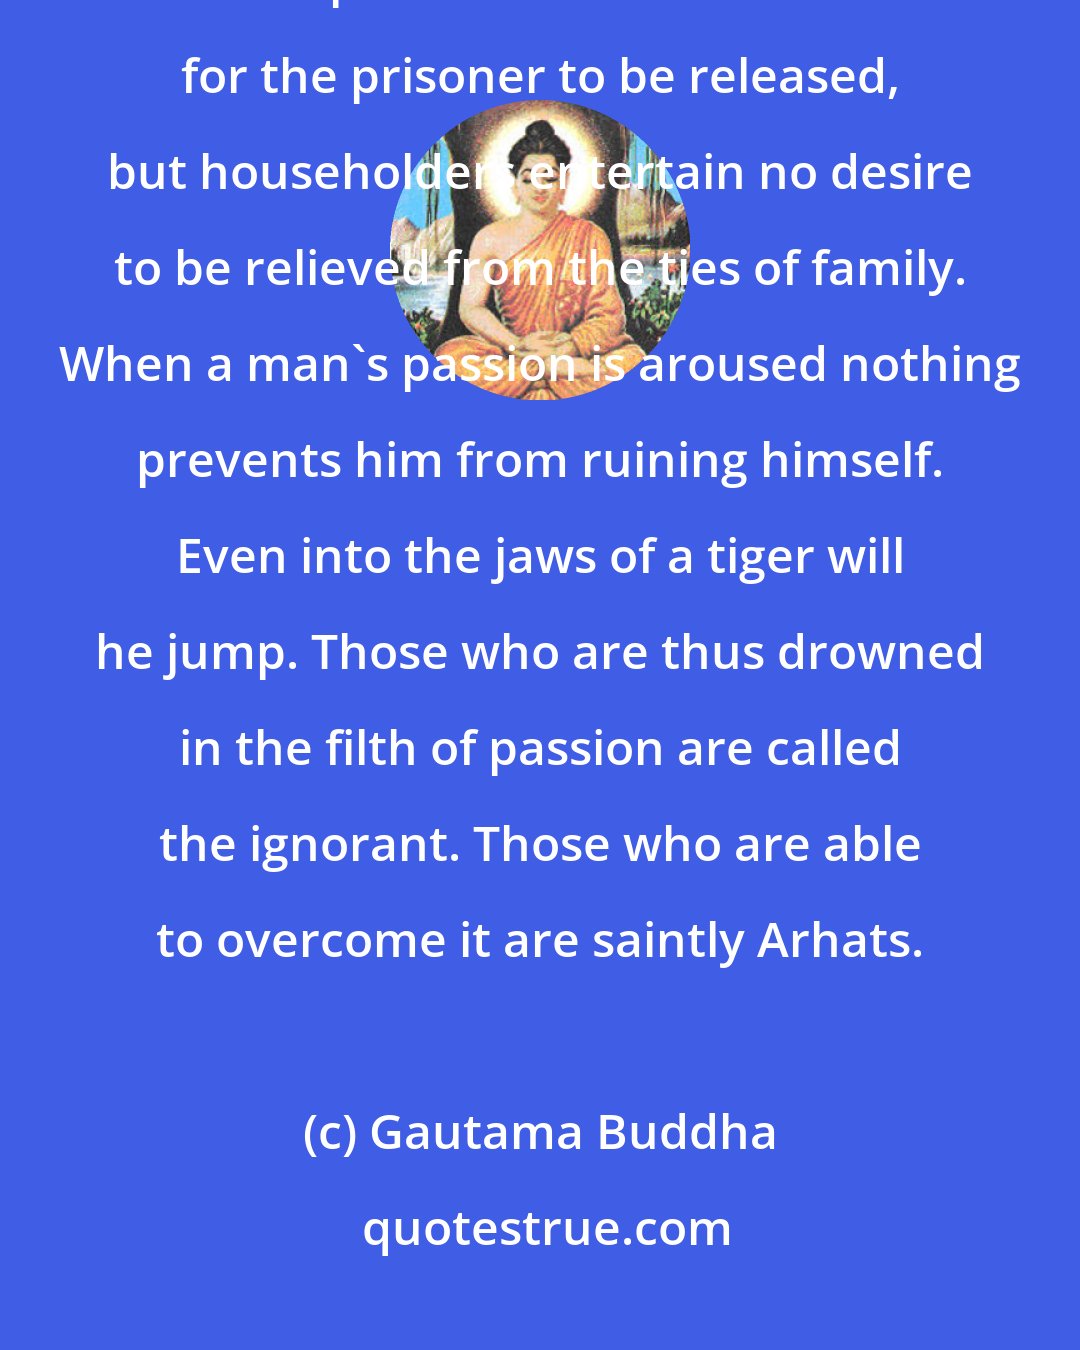 Gautama Buddha: Men are tied up to their families and possessions more helplessly than in a prison. There is an occasion for the prisoner to be released, but householders entertain no desire to be relieved from the ties of family. When a man's passion is aroused nothing prevents him from ruining himself. Even into the jaws of a tiger will he jump. Those who are thus drowned in the filth of passion are called the ignorant. Those who are able to overcome it are saintly Arhats.